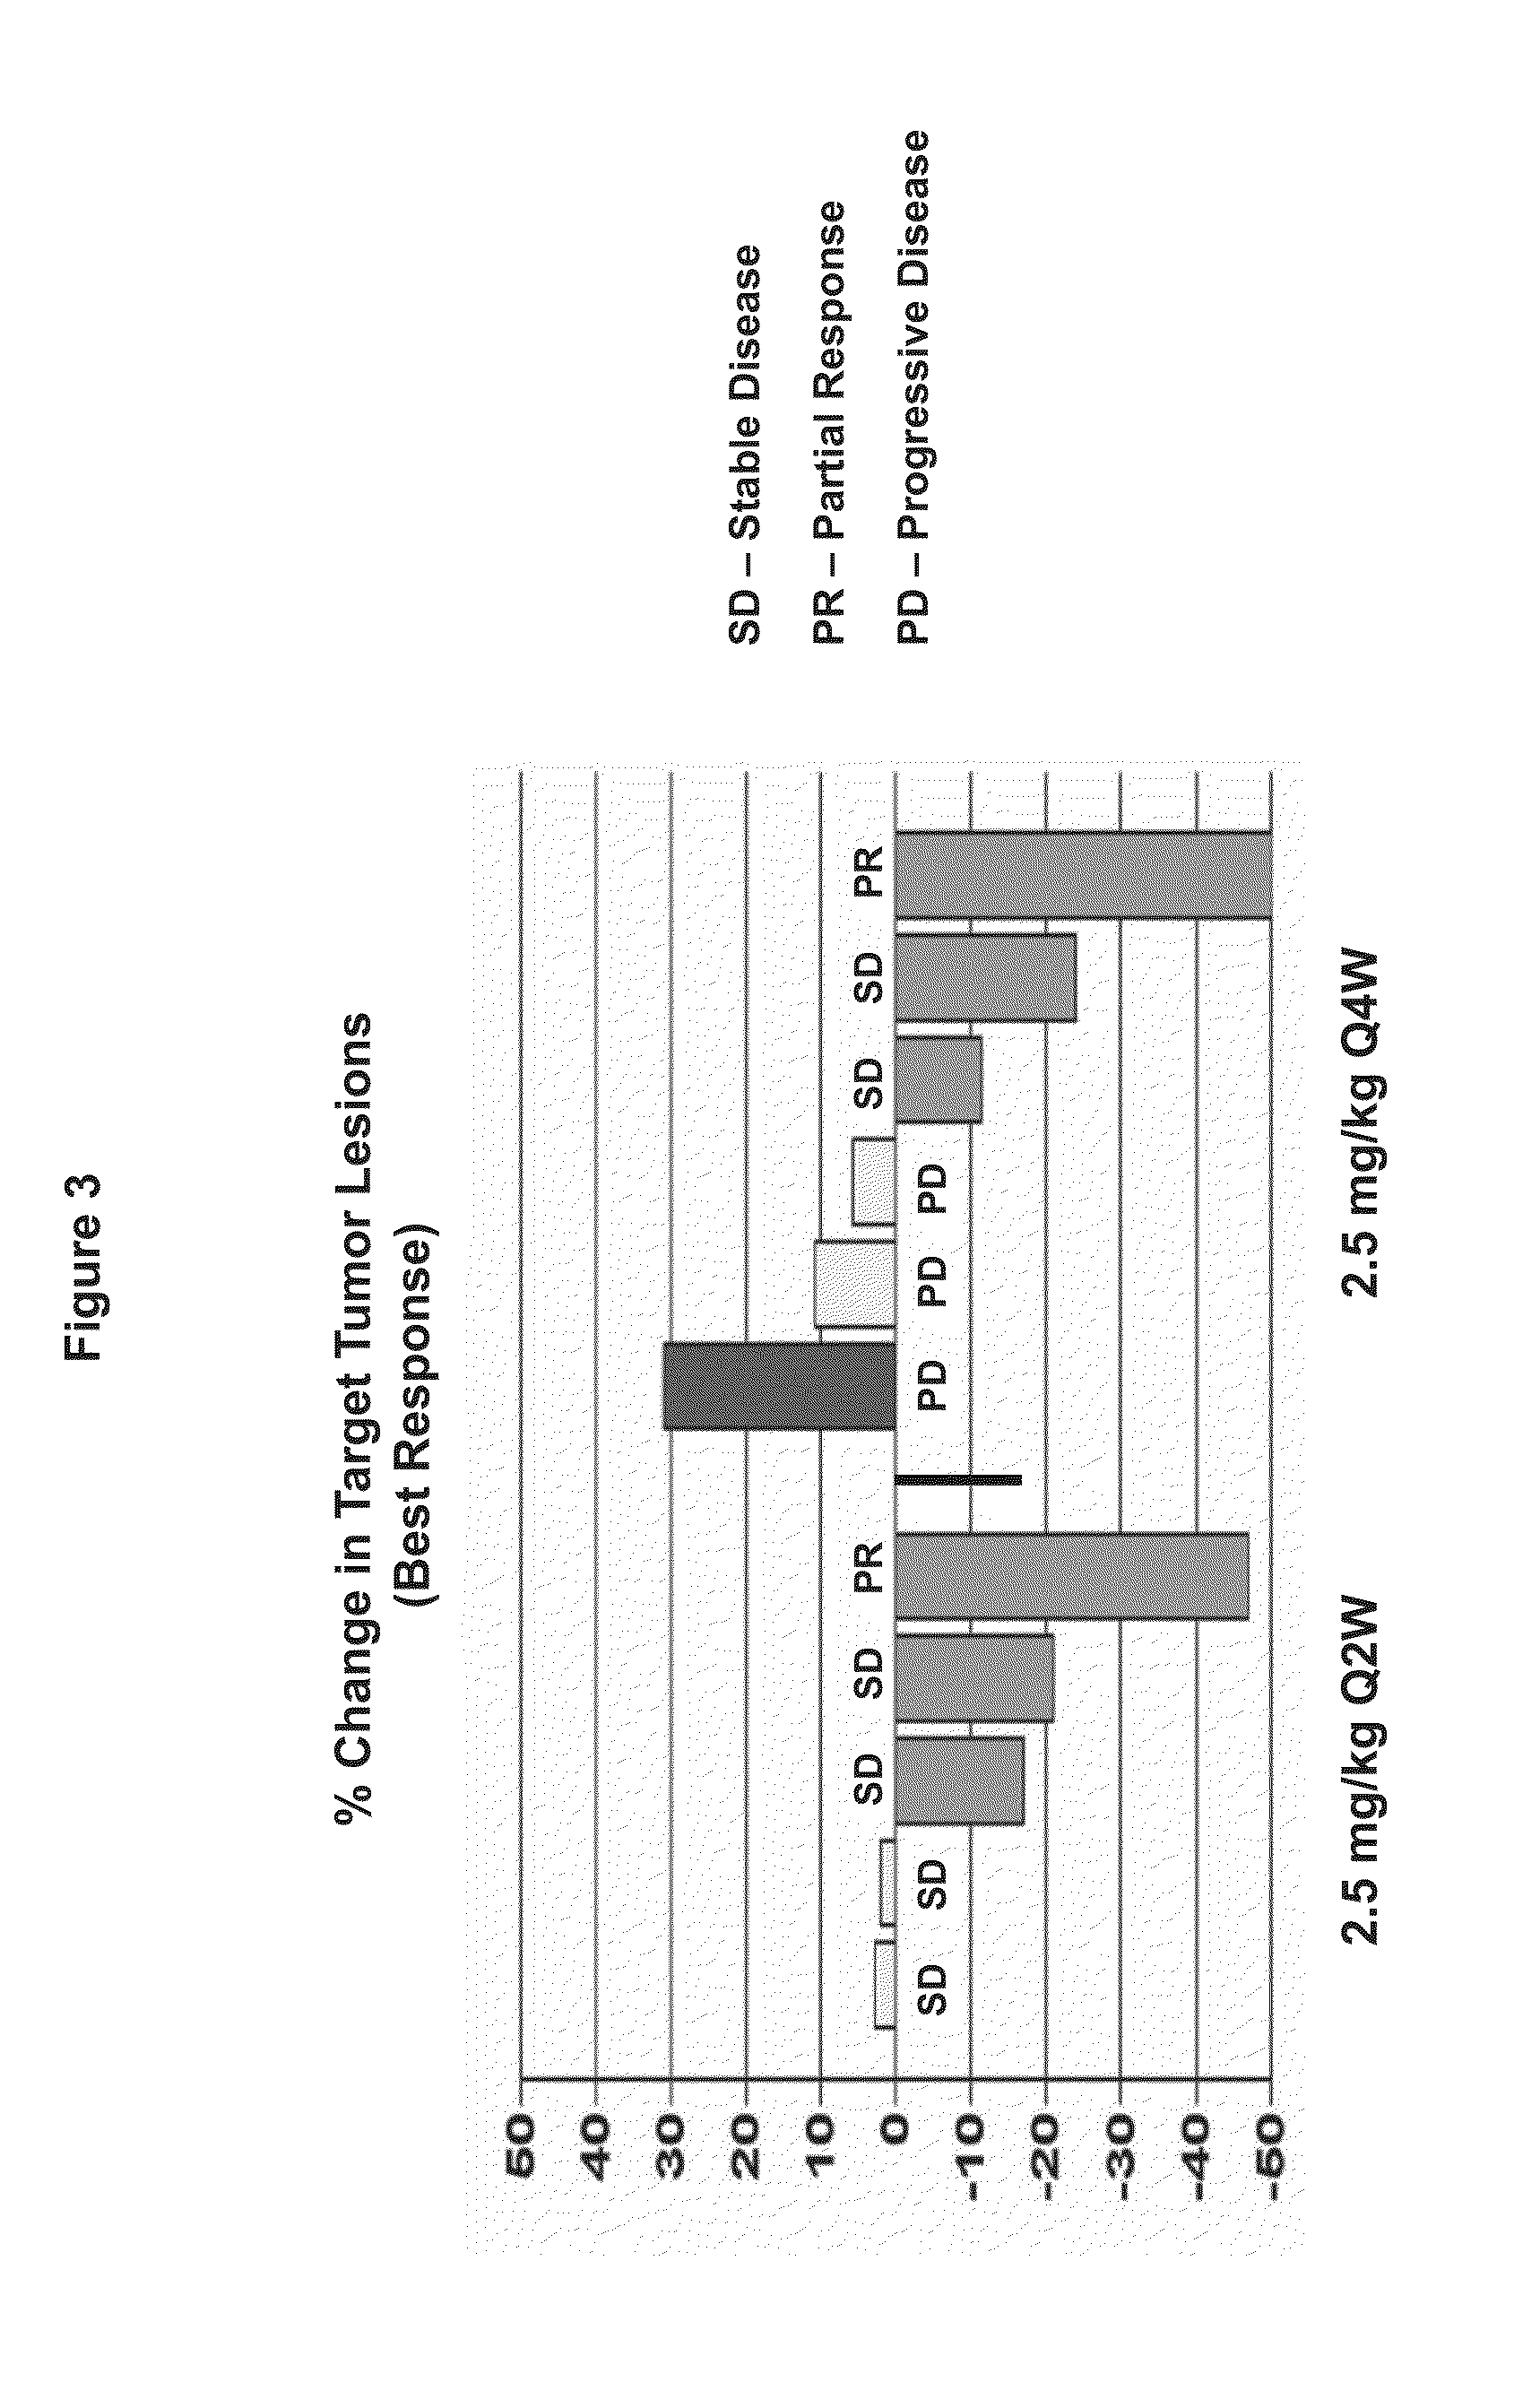 Methods and Monitoring of Treatment with a DLL4 Antagonist